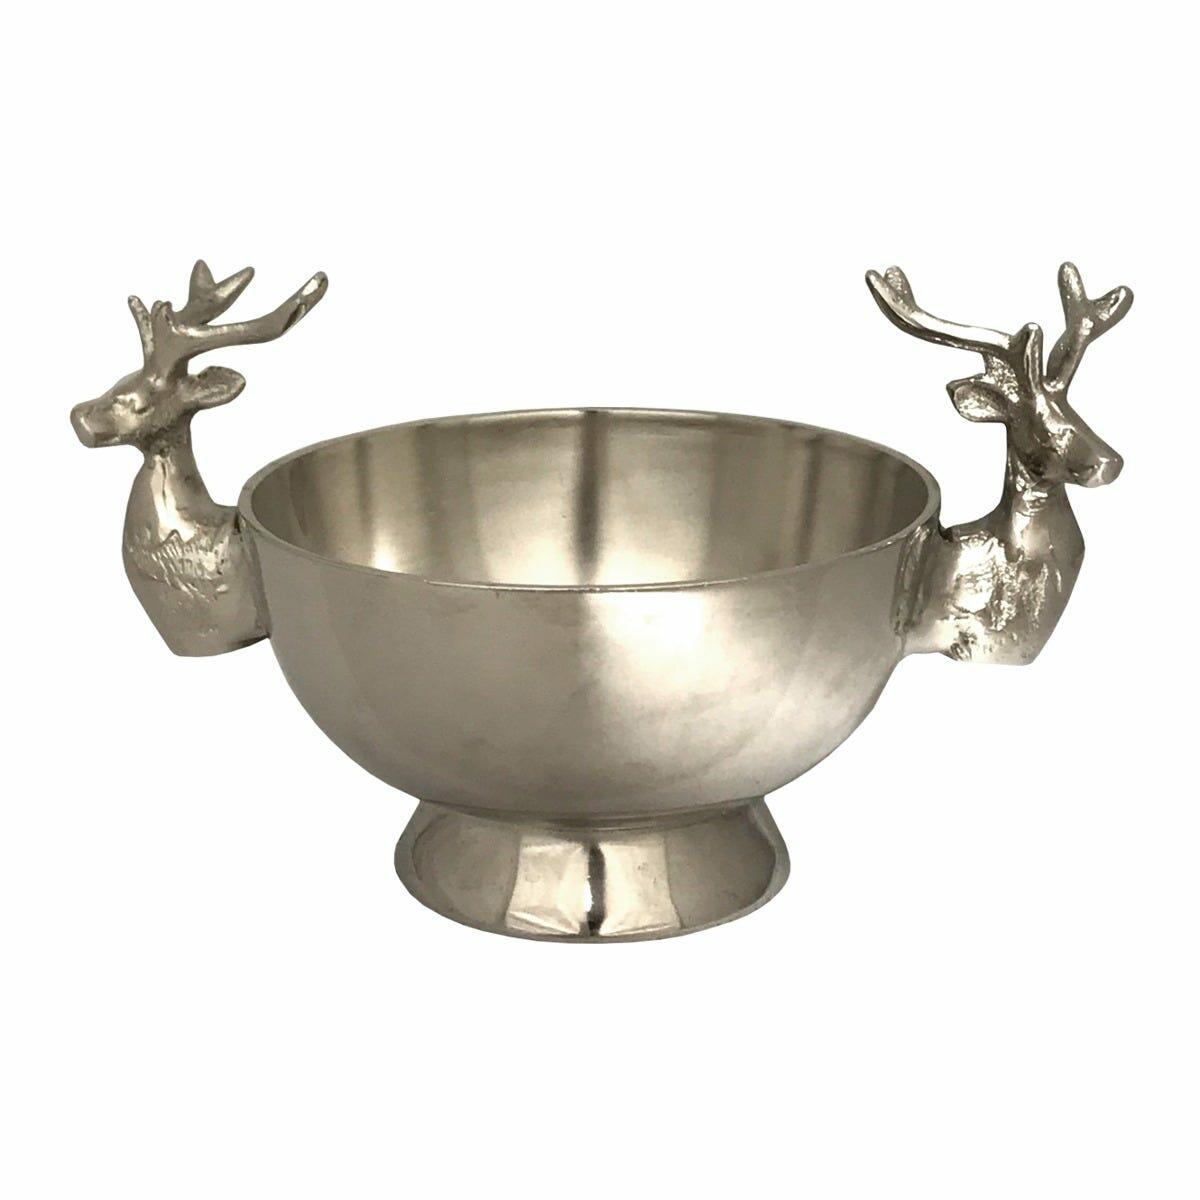 Culinary Concepts Stag Serving Bowl, Fortnum & Mason